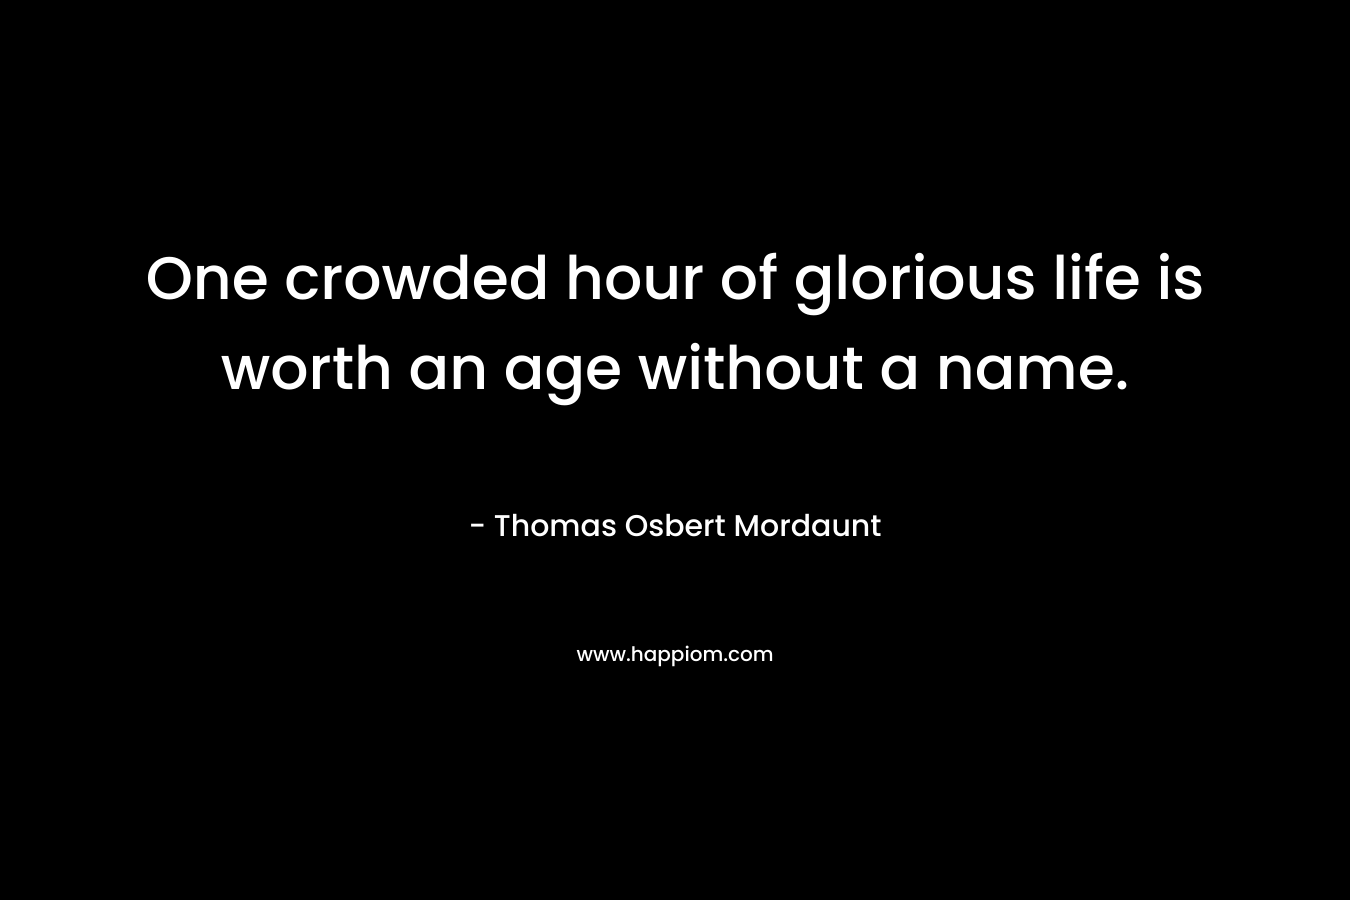 One crowded hour of glorious life is worth an age without a name. – Thomas Osbert Mordaunt